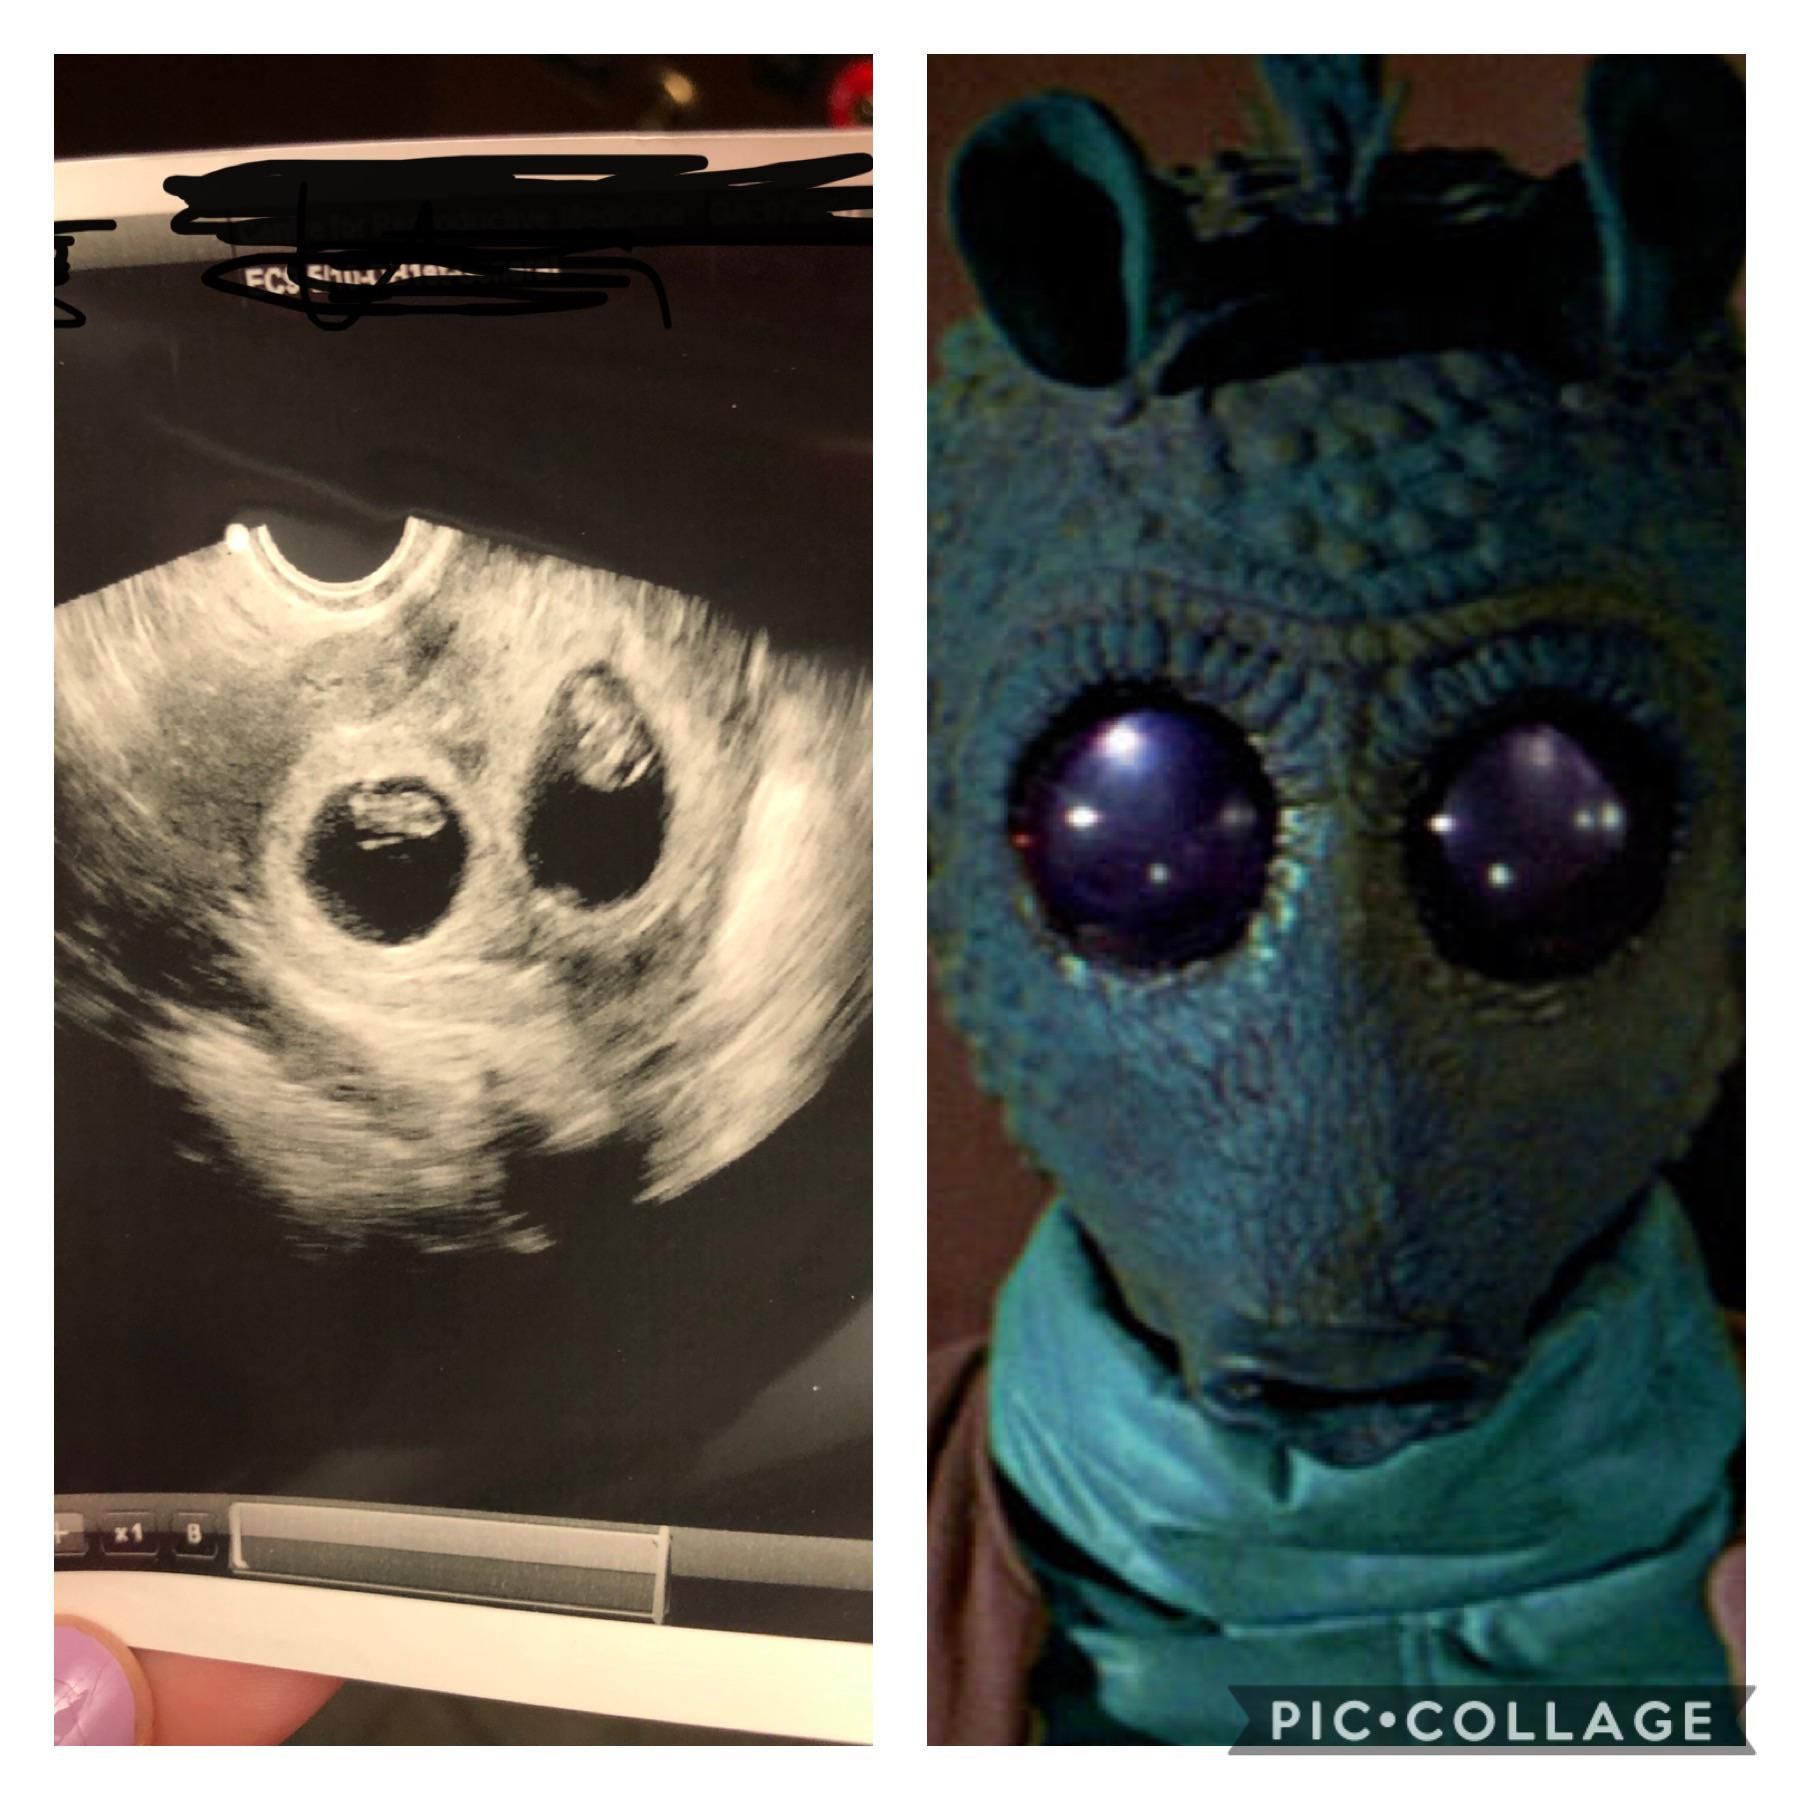 My wife’s ultrasound reminded me of something...